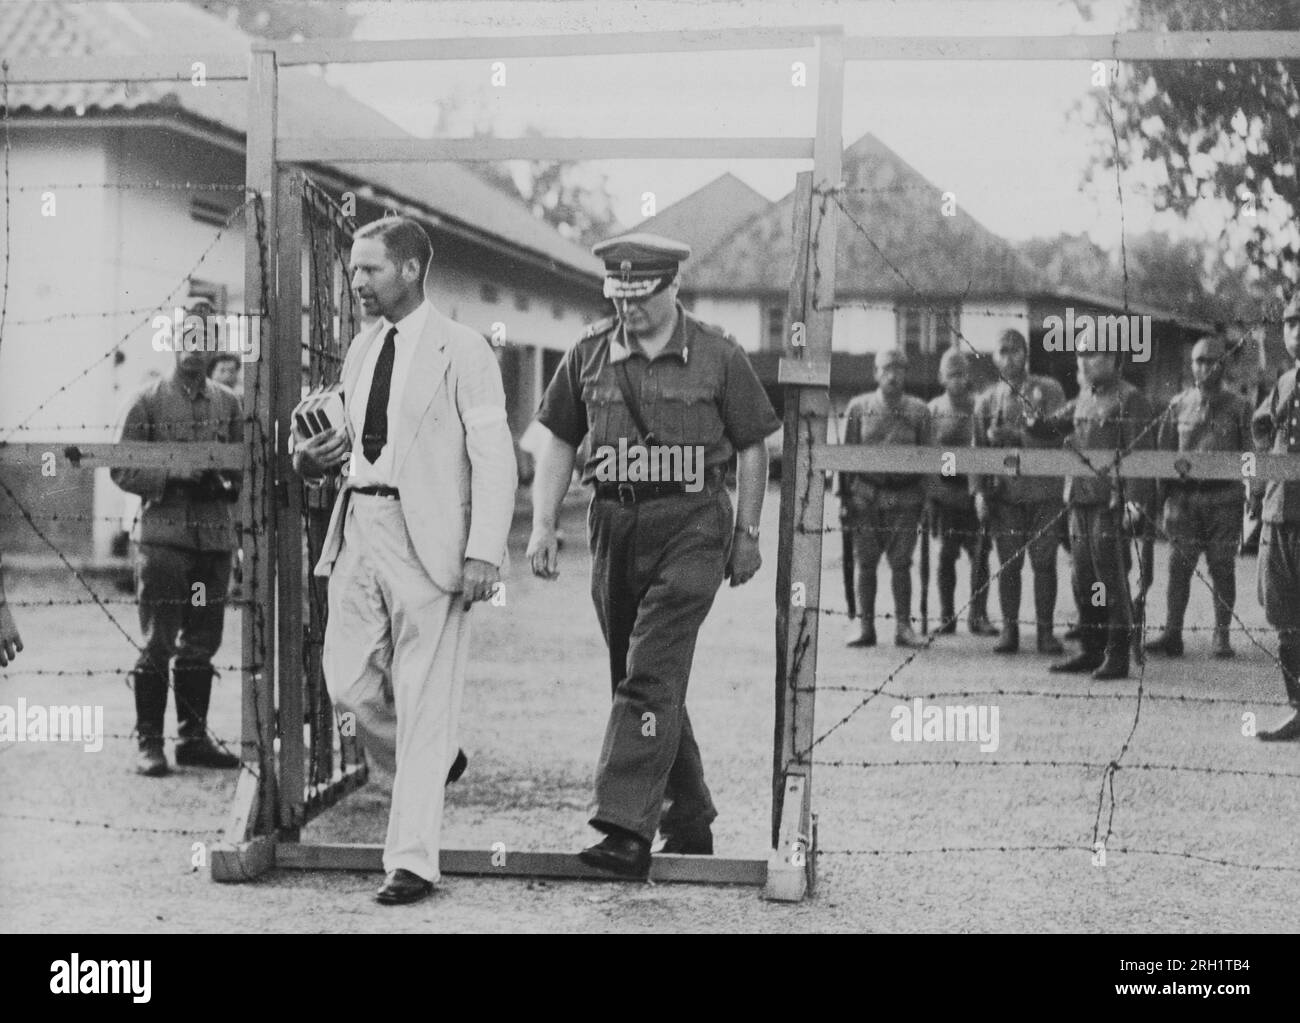 Dutch East Indies Campaign, December 1941 – March 1942. Following the fall of the Dutch East Indies to the invading Imperial Japanese Sixteenth Army, Governor-General Tjarda van Starkenborgh Stachouwer (left) and Lieutenant-General ter Poorten are taken prisoner and escorted into a Japanese internment camp in Batavia, March 1942. Stock Photo